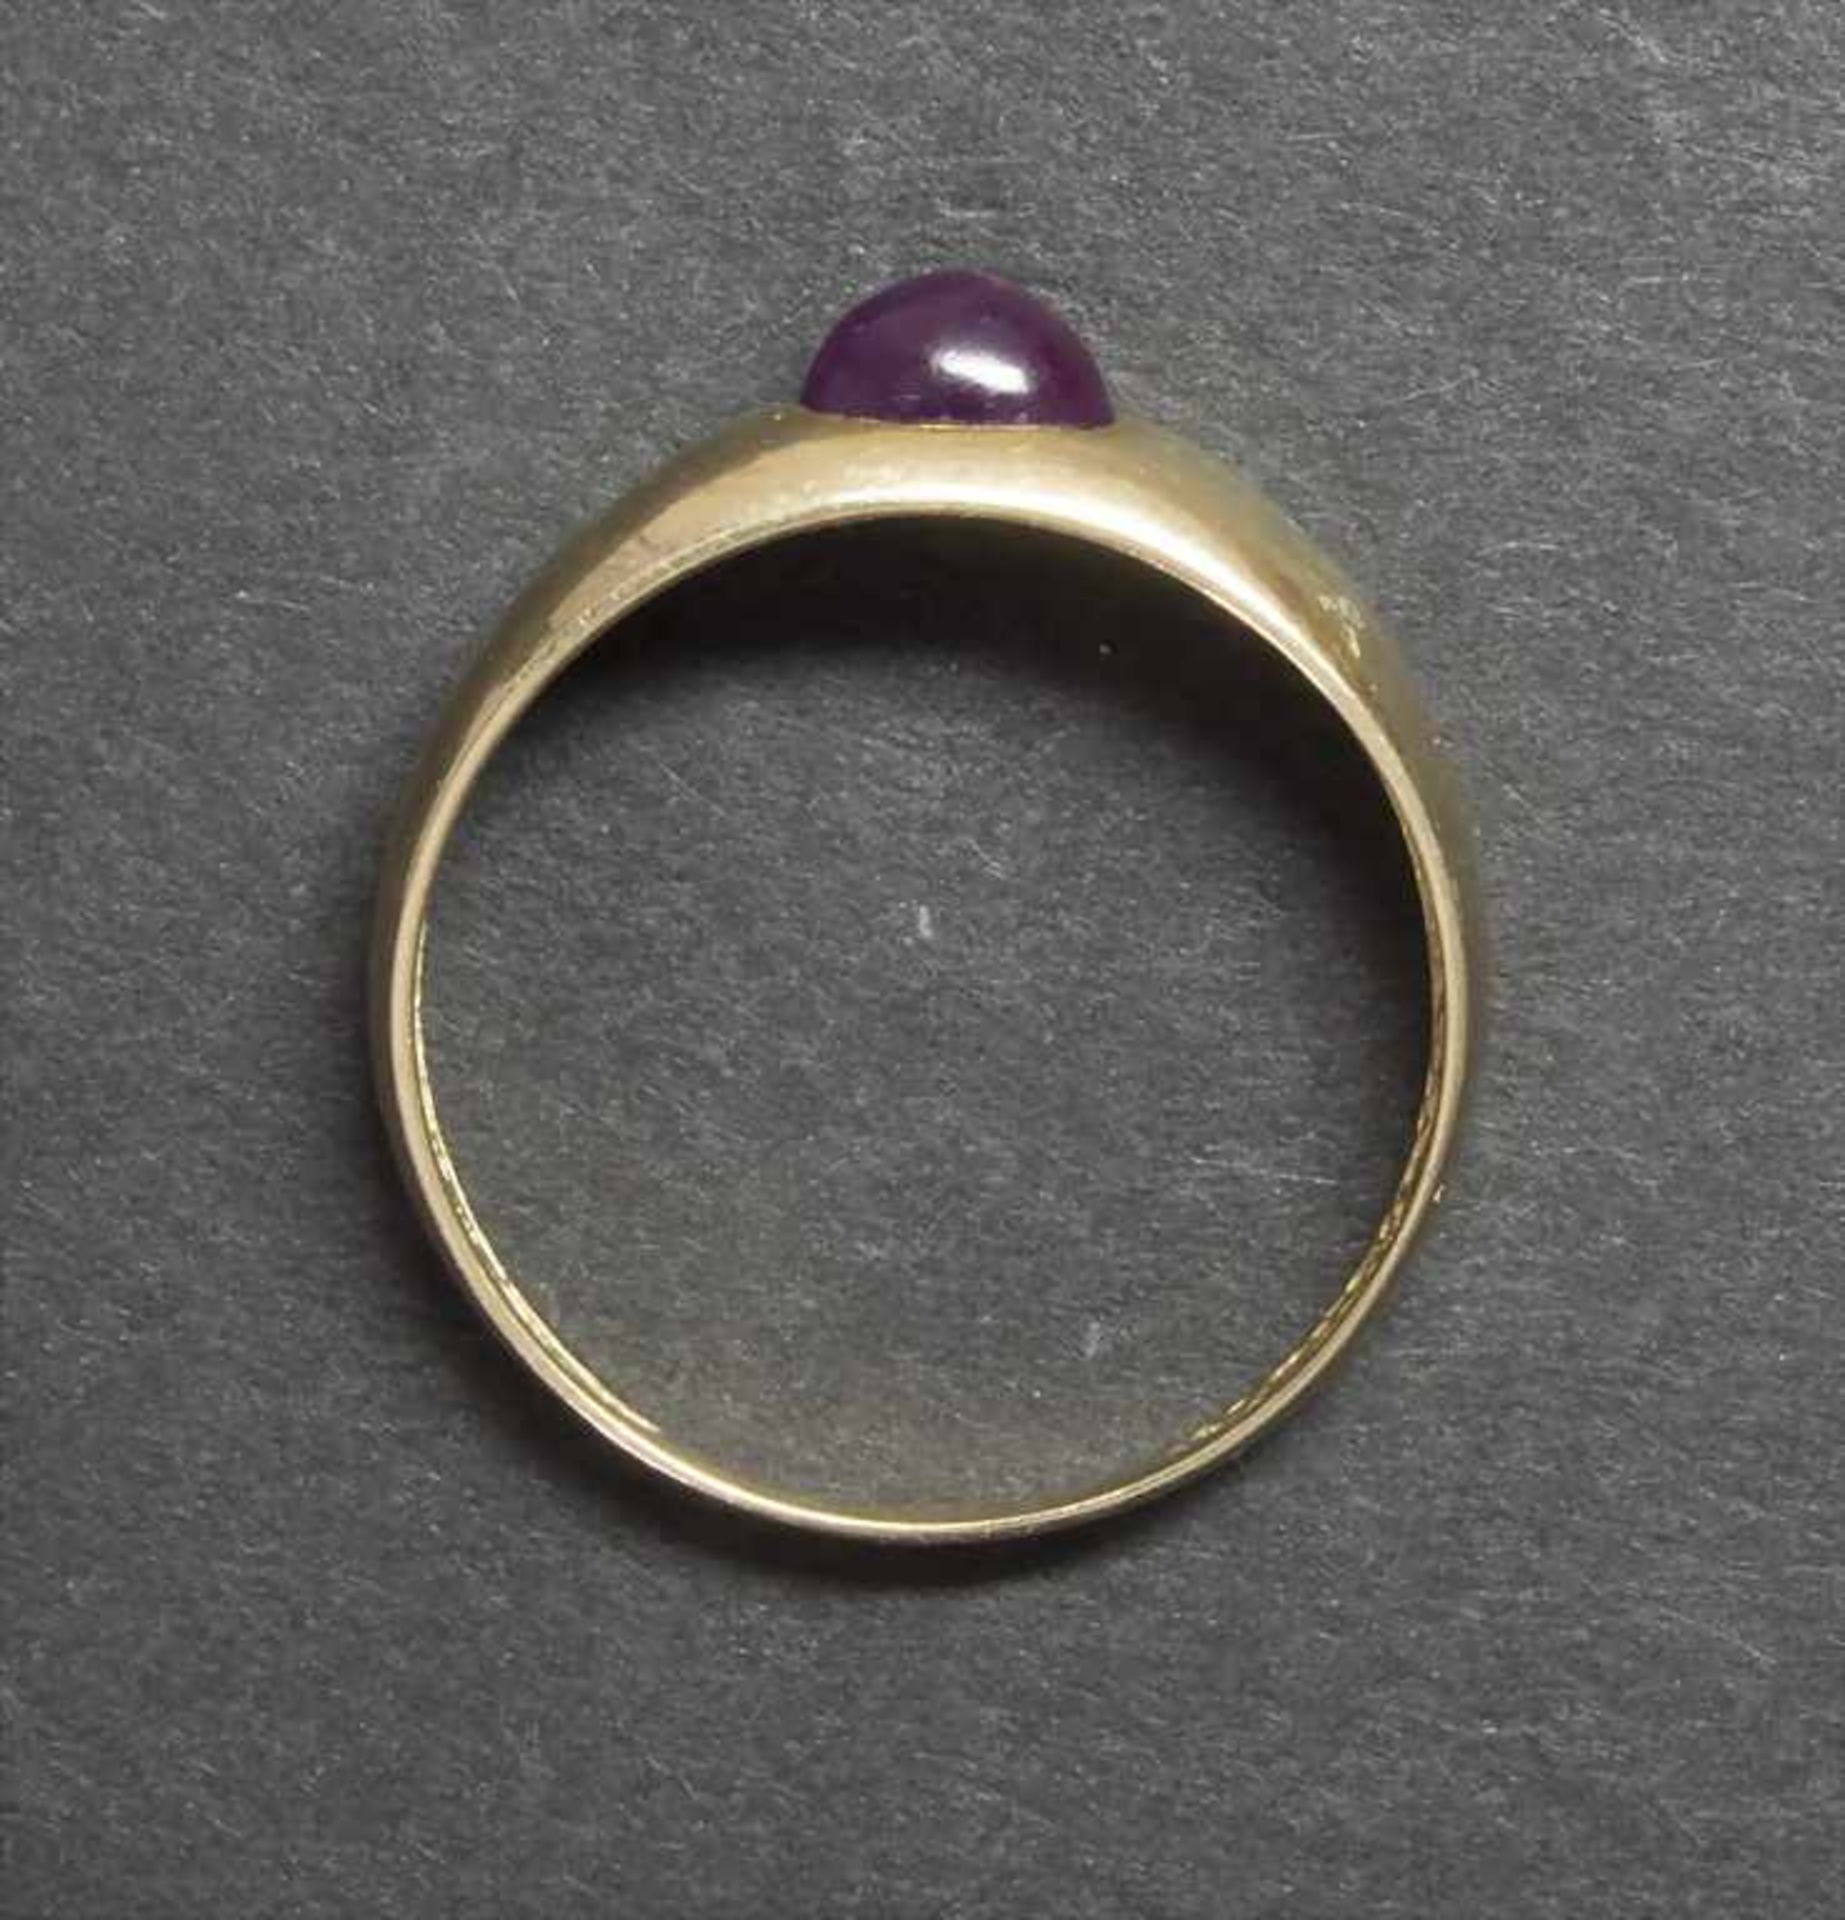 Damenring mit Rubin Cabochon / A ladies ring with ruby cabochonMaterial: Gelbgold 8 Kt. 333/000, - Image 3 of 3